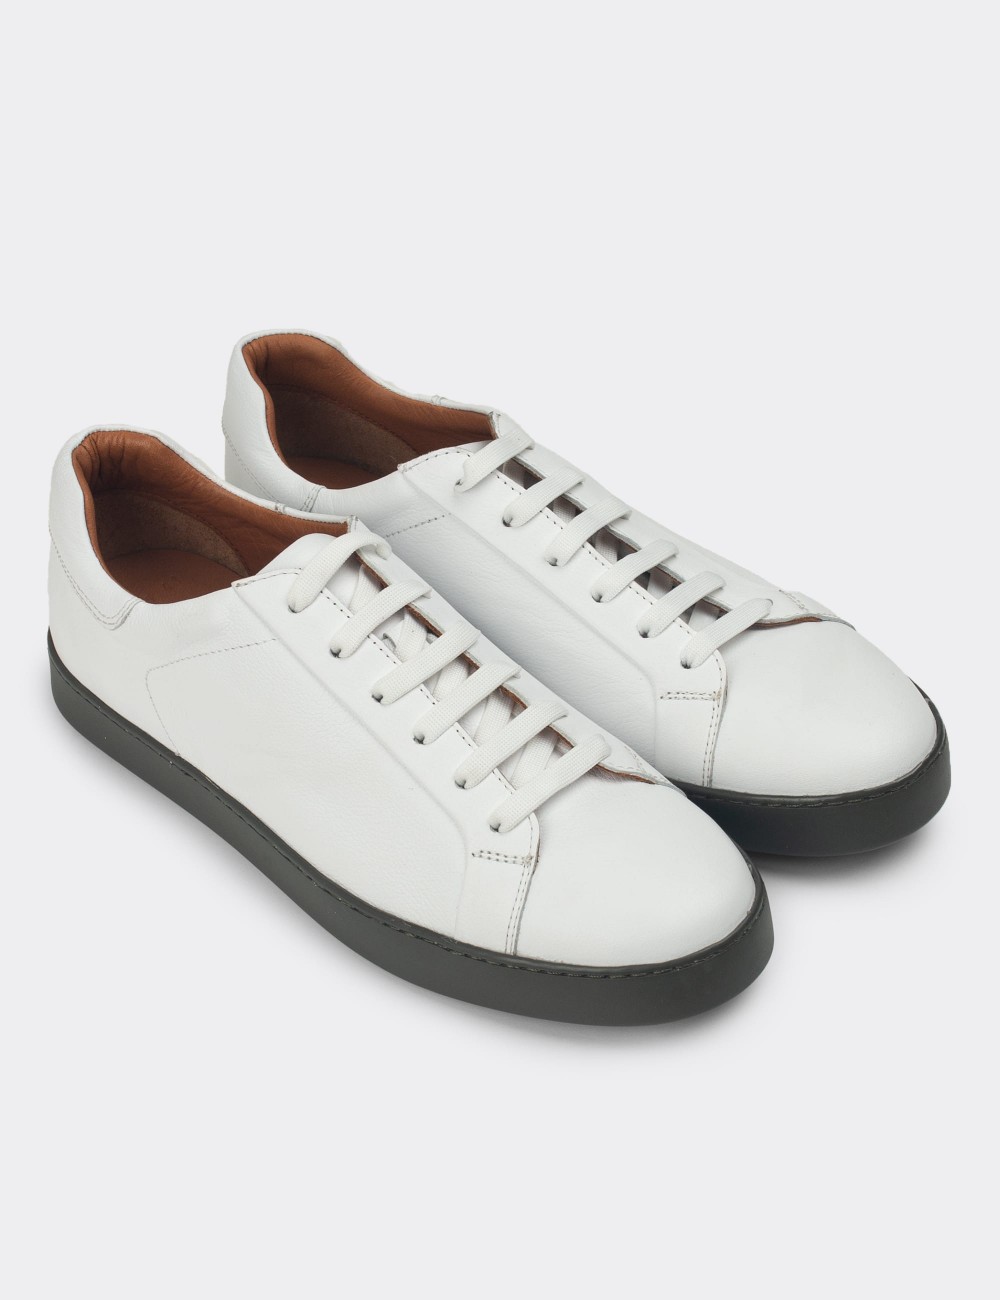 White Leather Sneakers - 01829MBYZC13